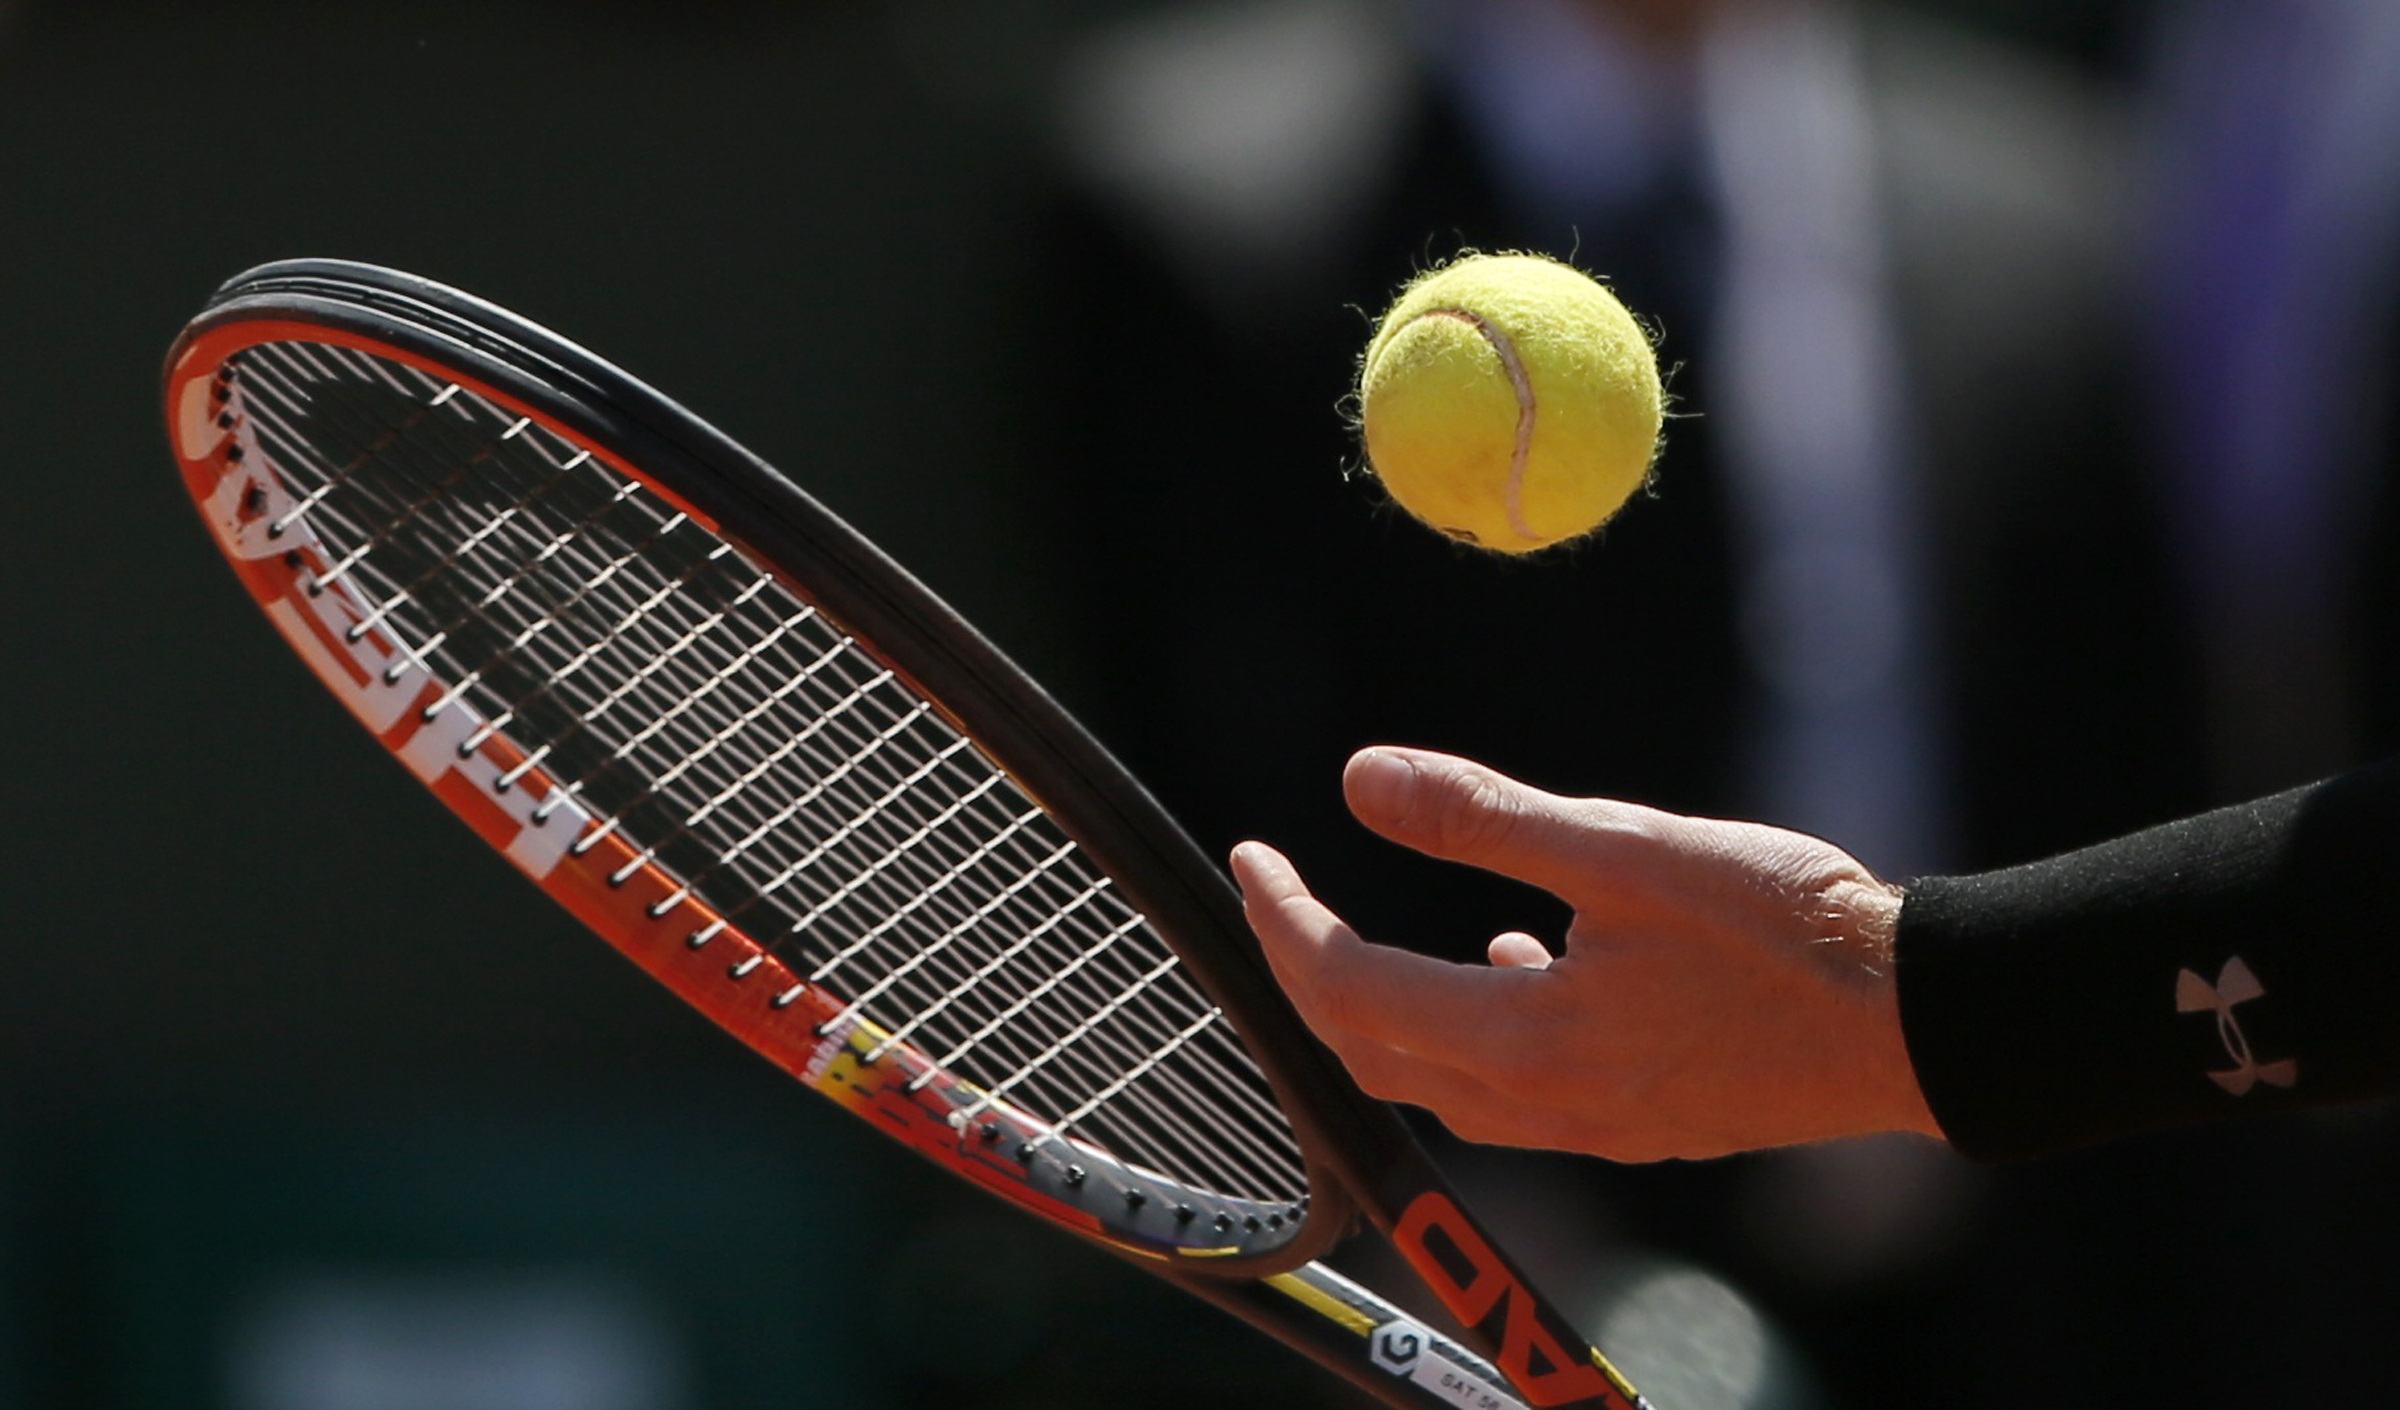 A ball and the racket of Andy Murray of Britain are pictured as he prepares to serve to Novak Djokovic of Serbia during their men's semi-final match at the French Open tennis tournament at the Roland Garros stadium in Paris